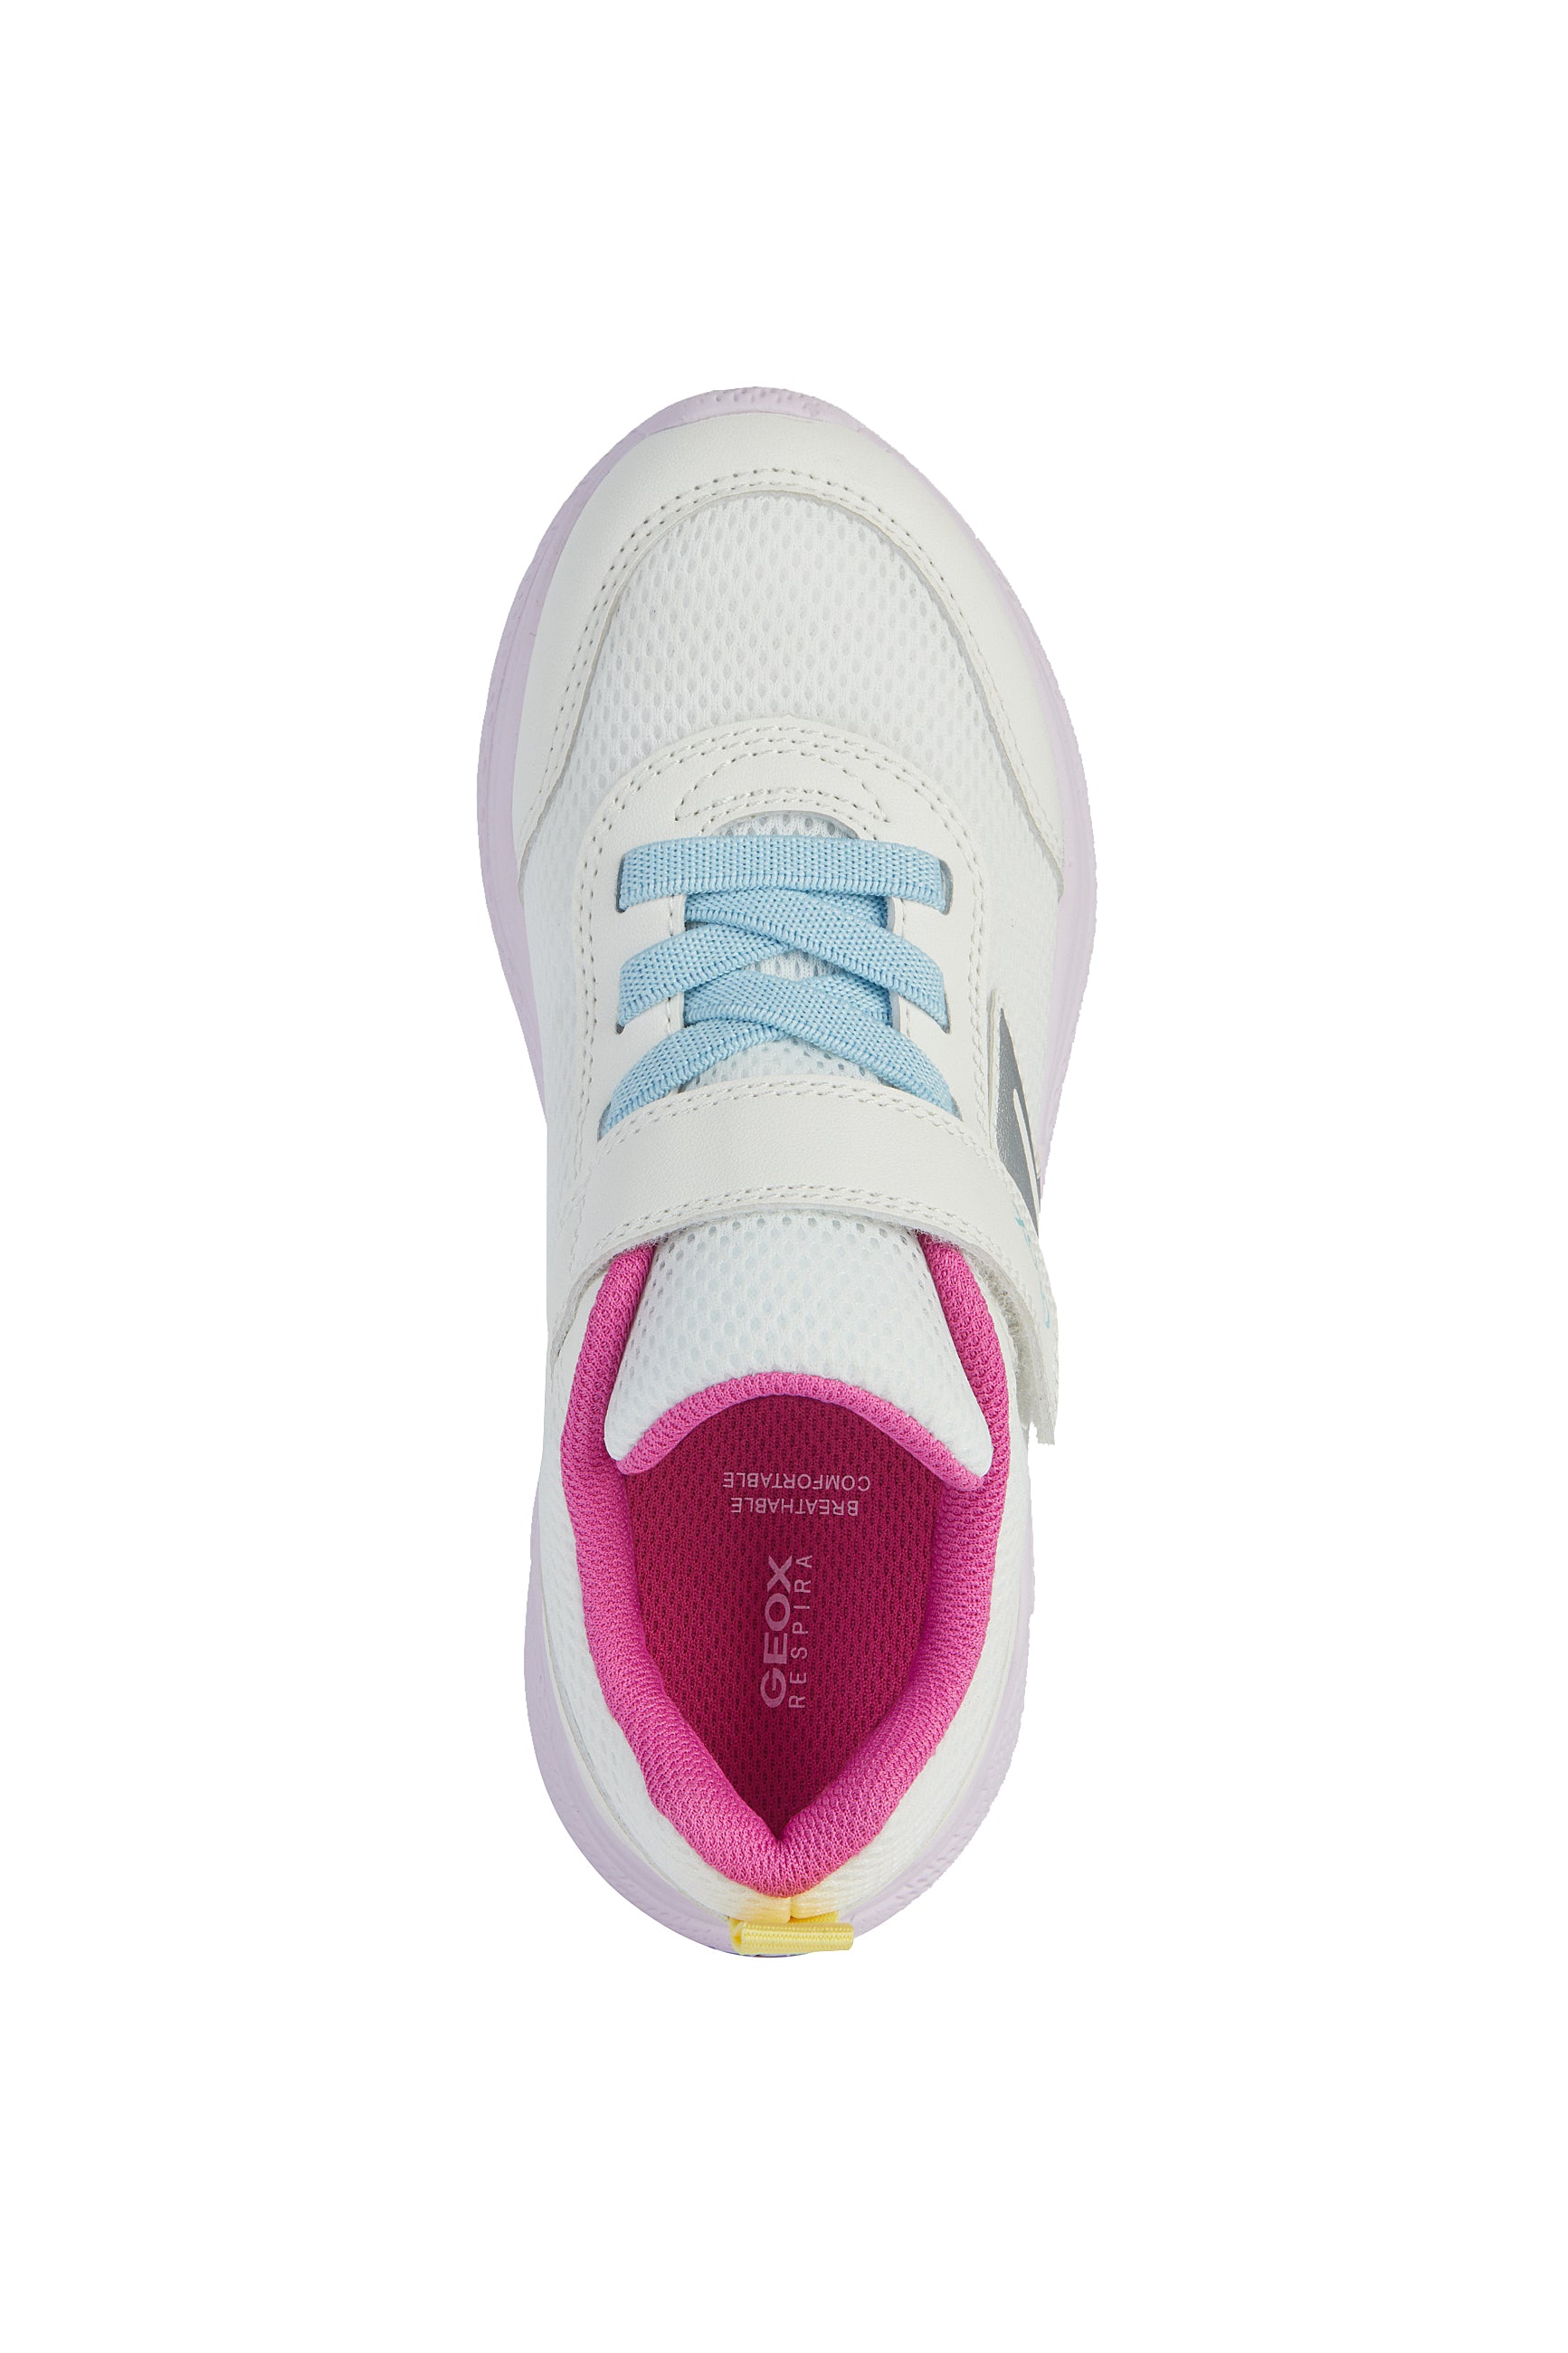 A girls trainer by Geox, style J Sprintye, in white with yellow and pink trim and velcro and blue bungee lace fastening. View from above.